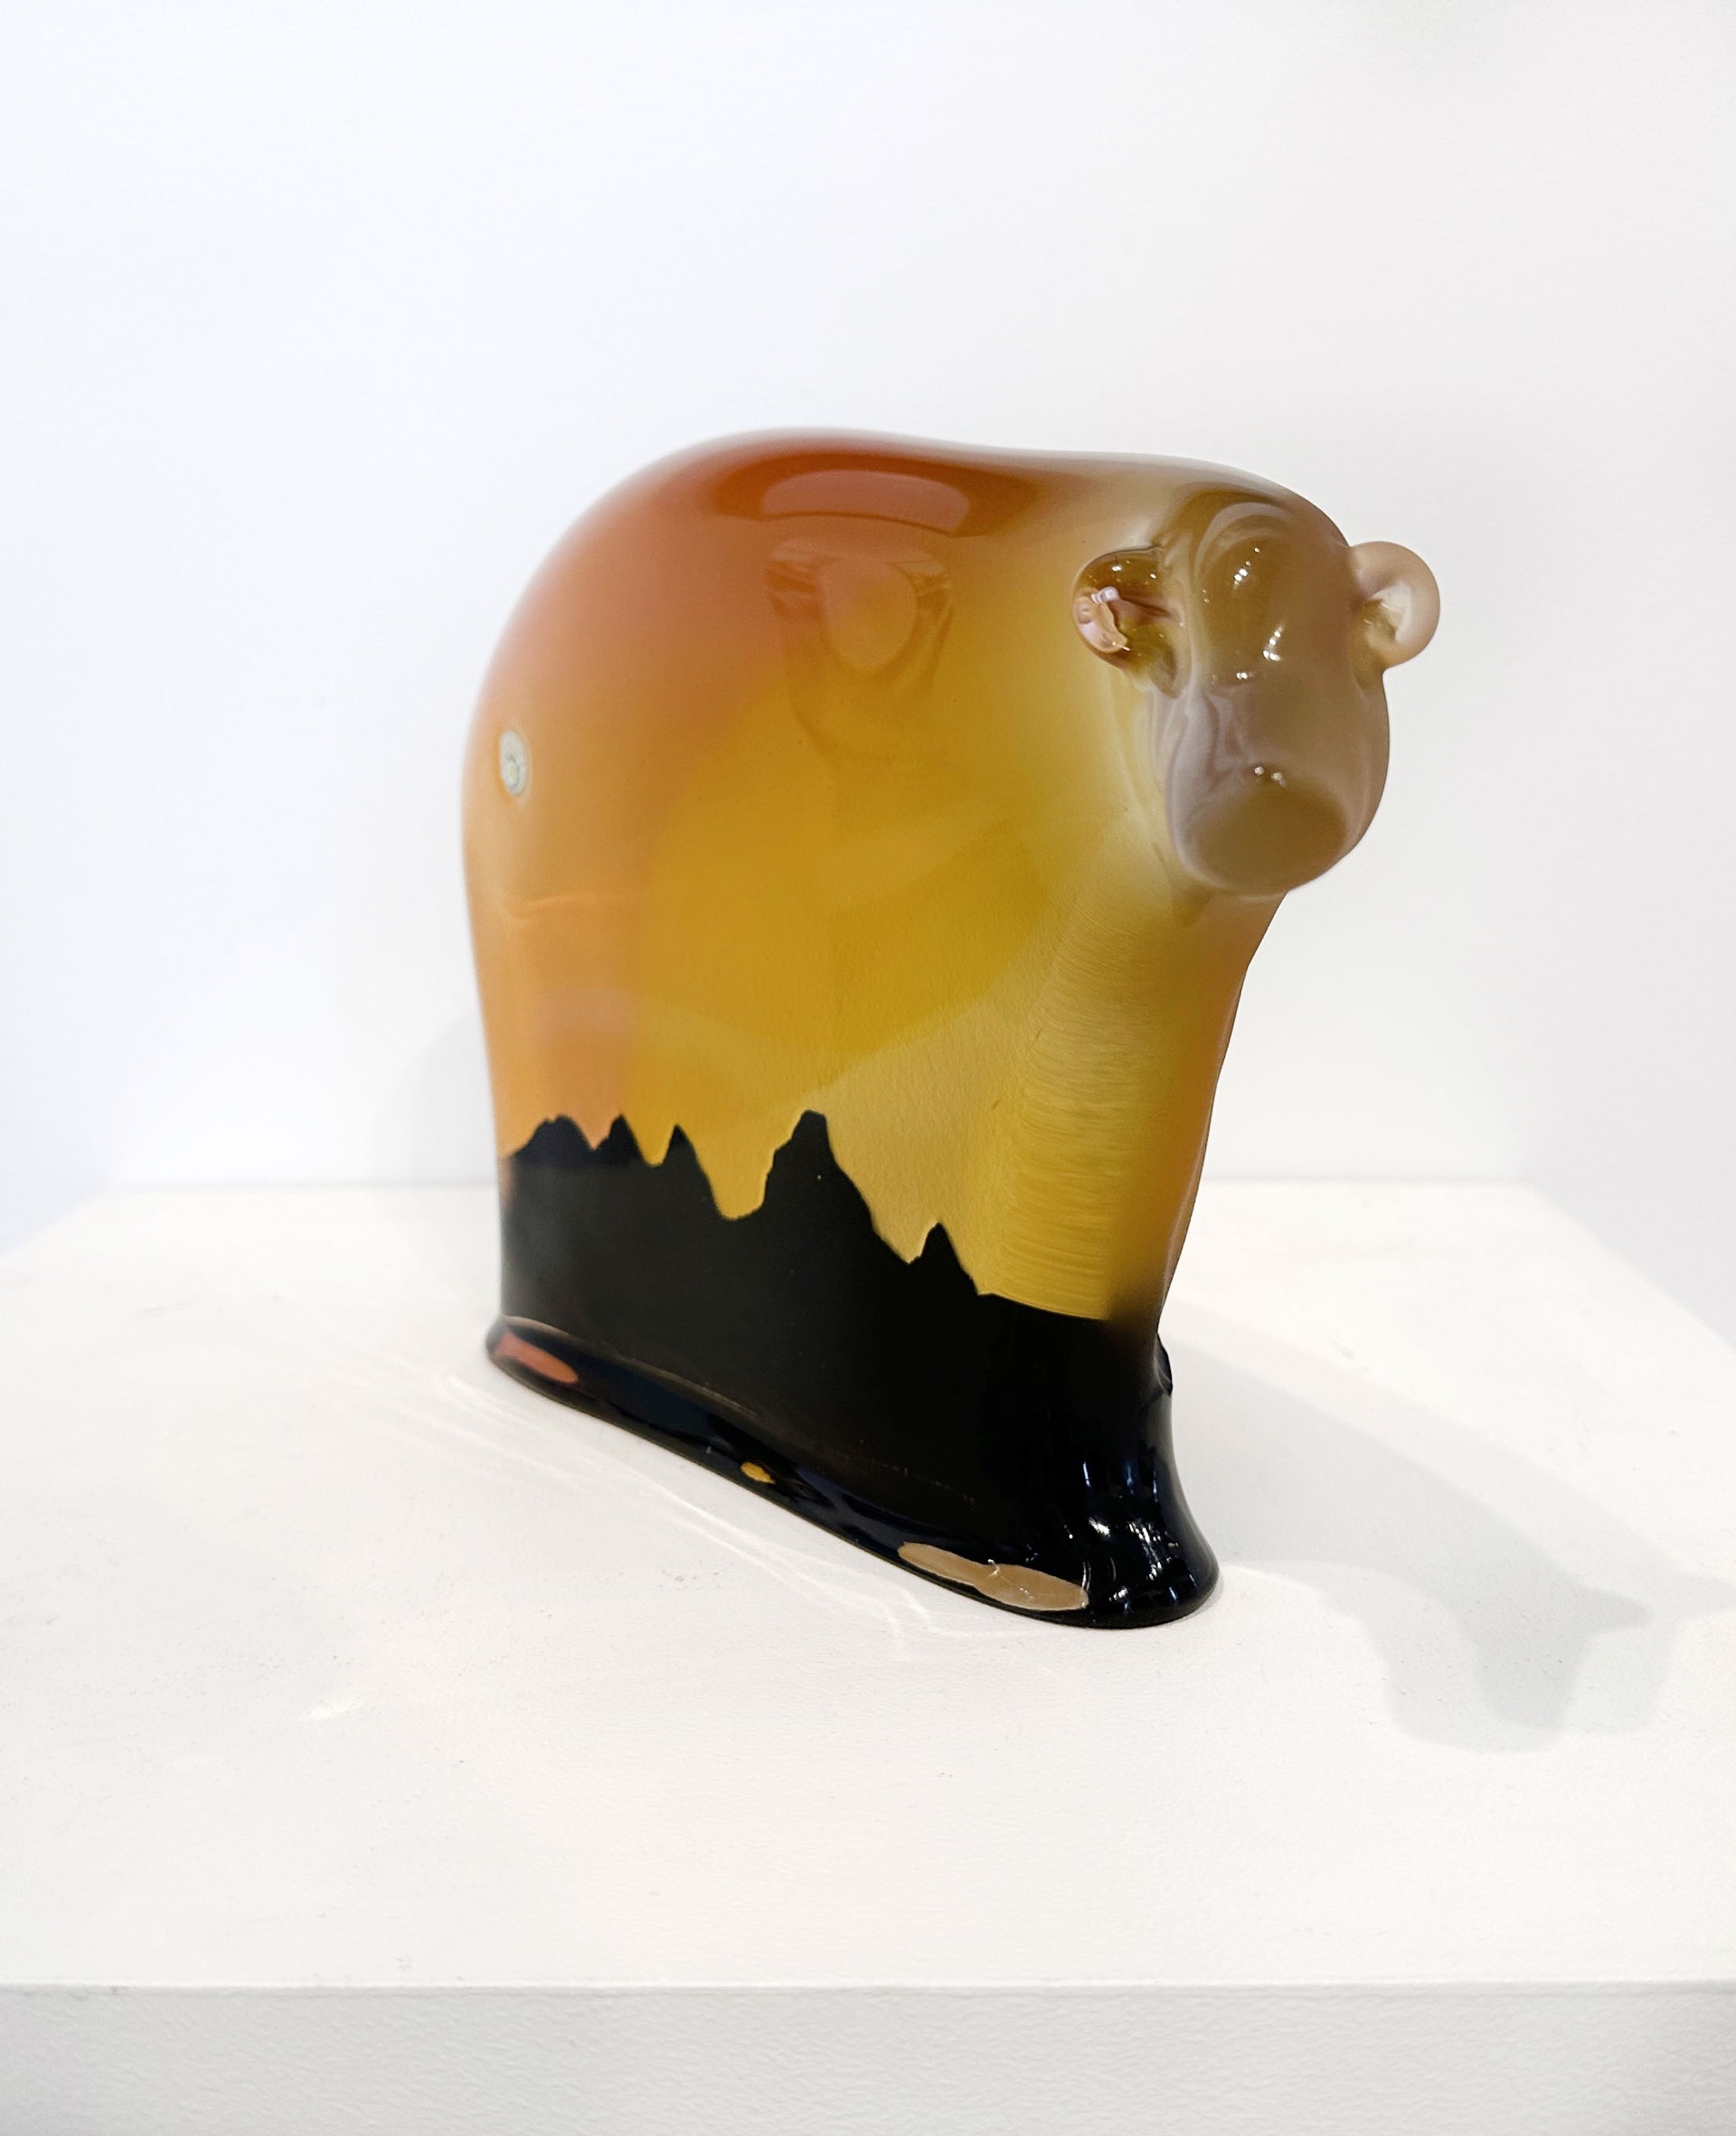 Original Glass Blow Sculpture By Dan Friday Featuring An Abstracted Bear Form In Orange To Yellow Gradient With The Teton Mountain Range Silhouette In Deep Purple